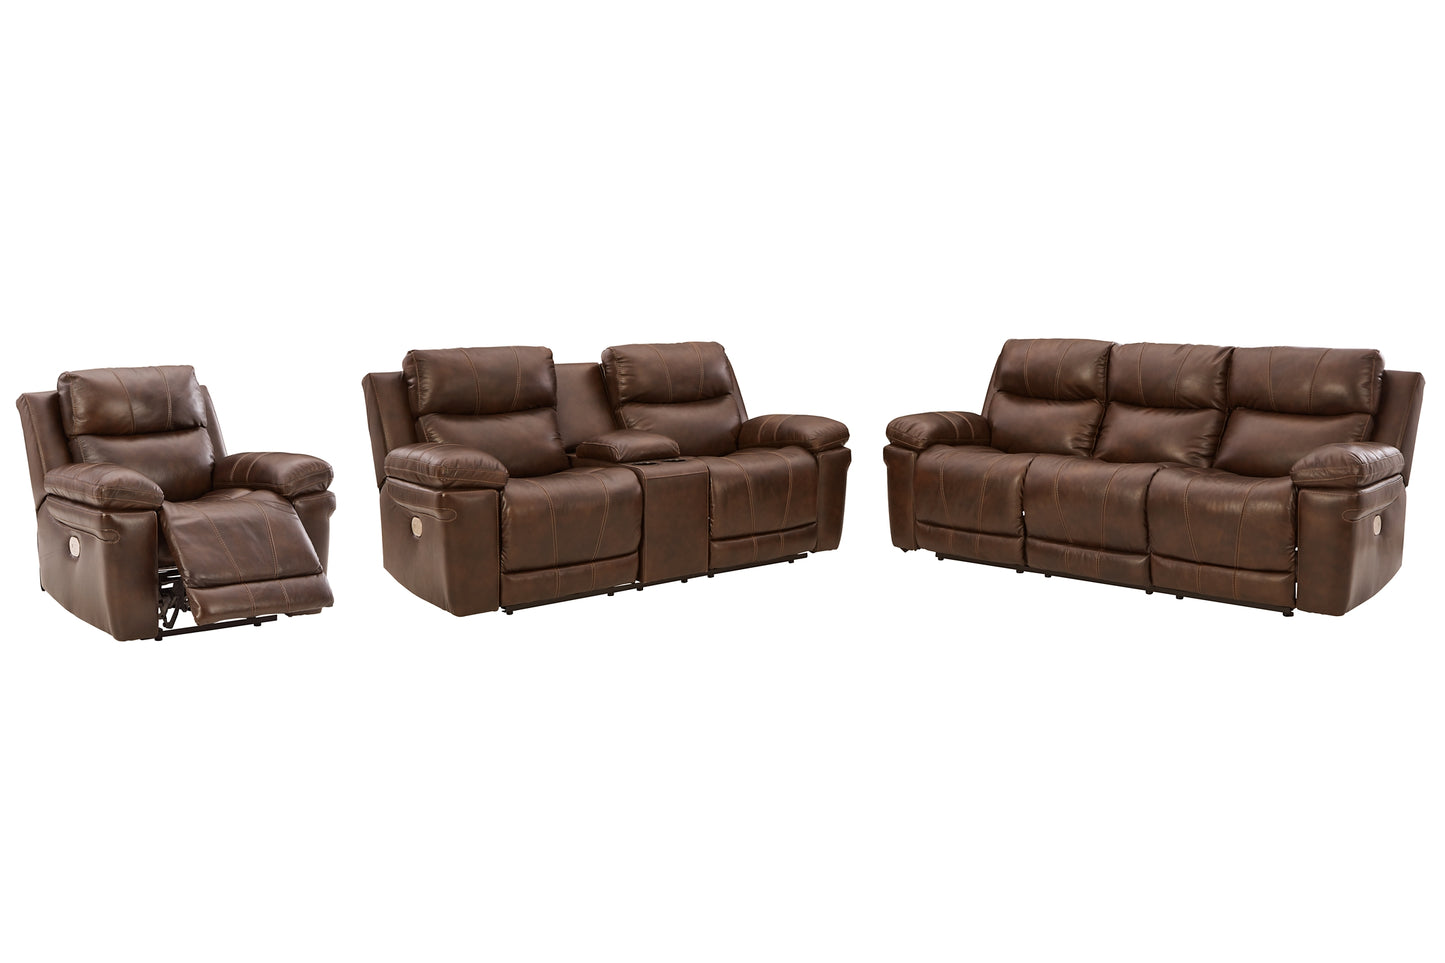 Edmar Sofa, Loveseat and Recliner Signature Design by Ashley®